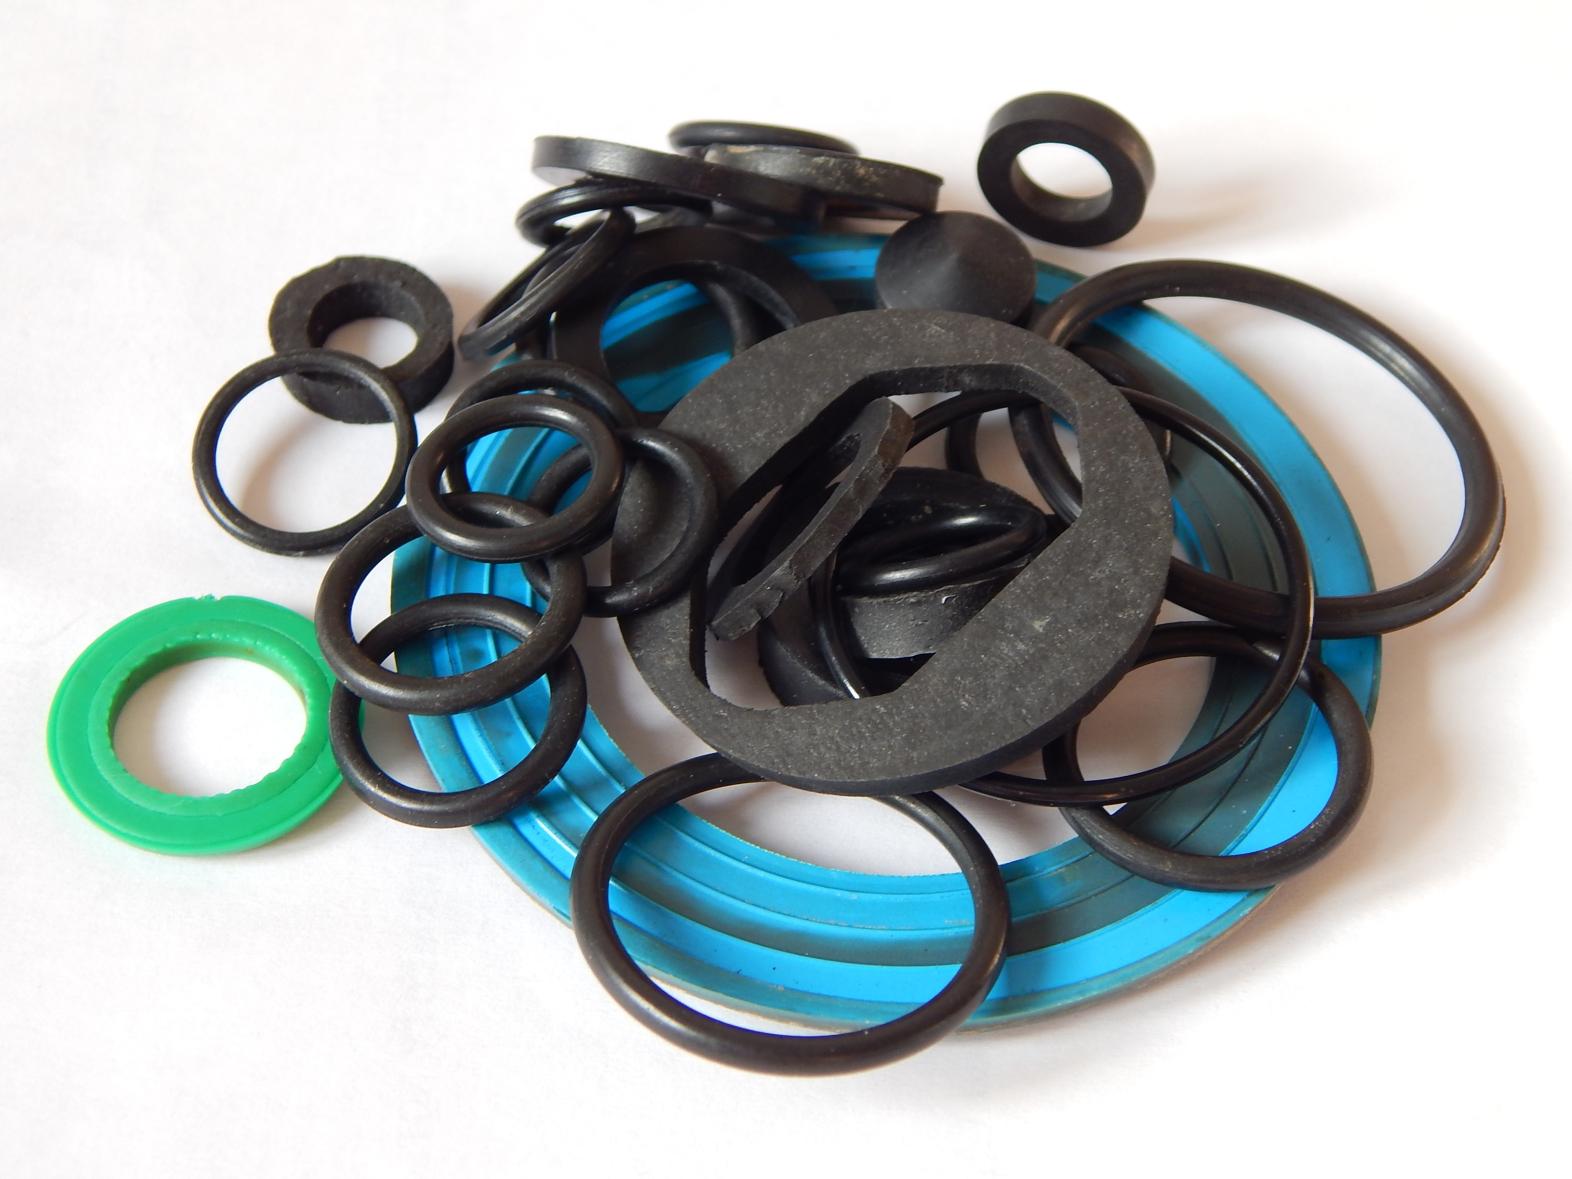 Various types and sizes of o-rings